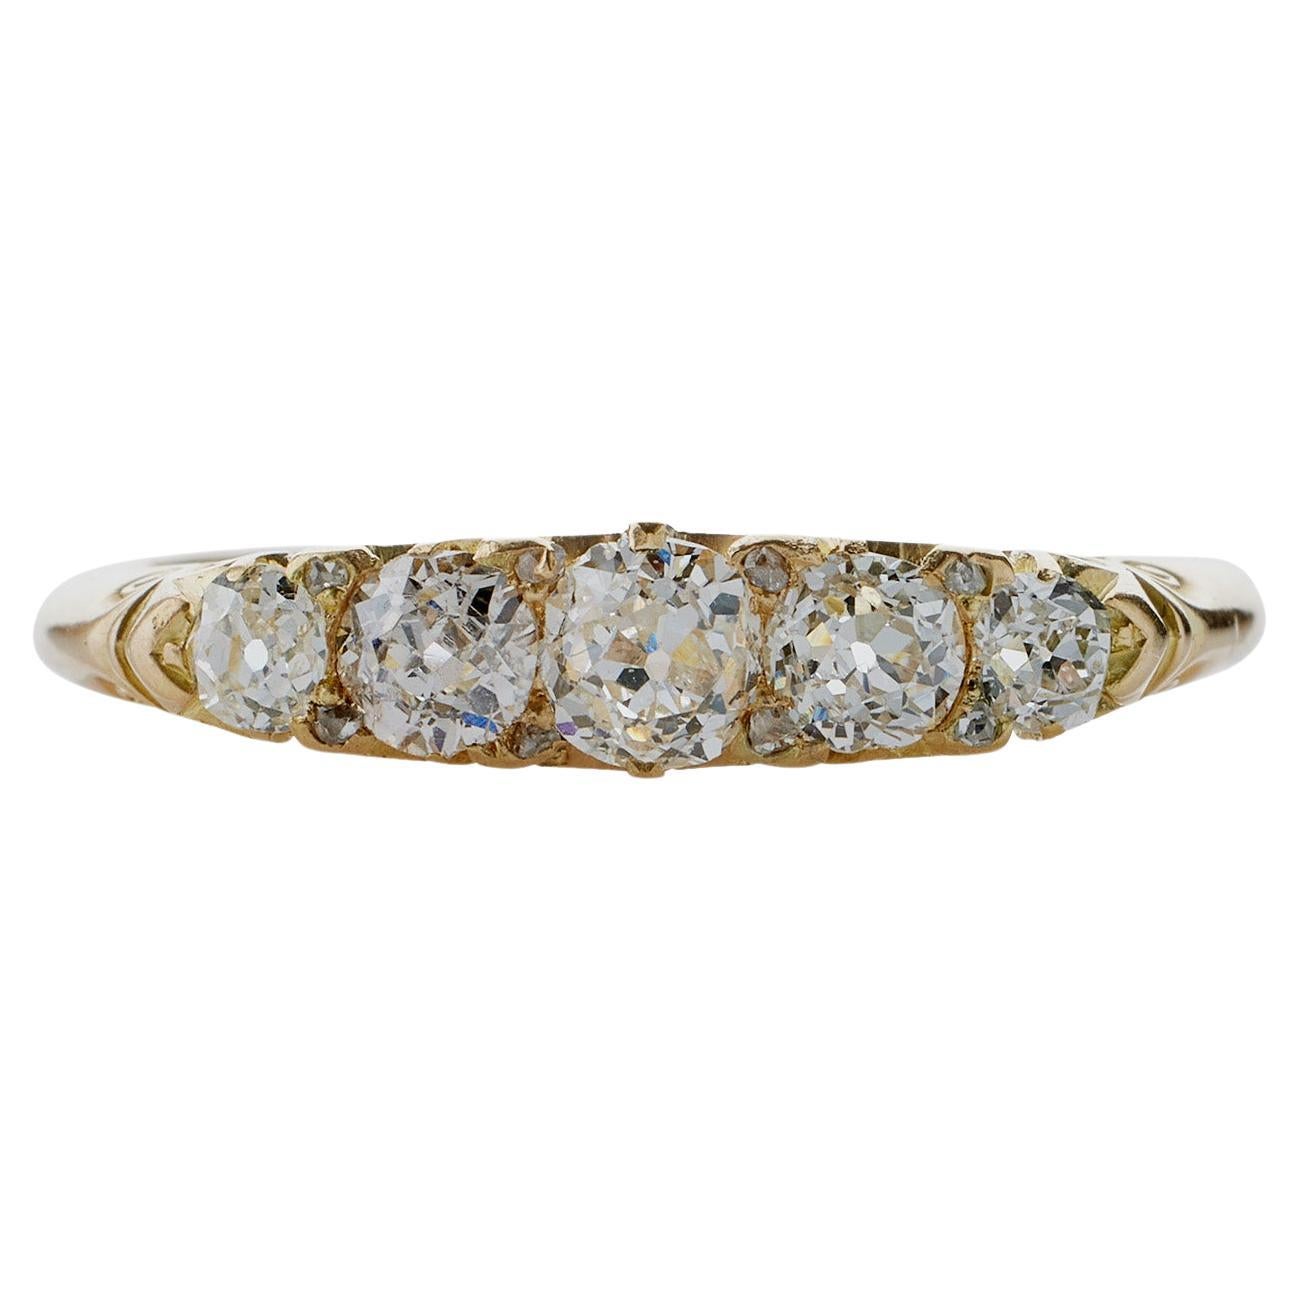 Antique English 18K Gold and Five Stone Diamond Ring